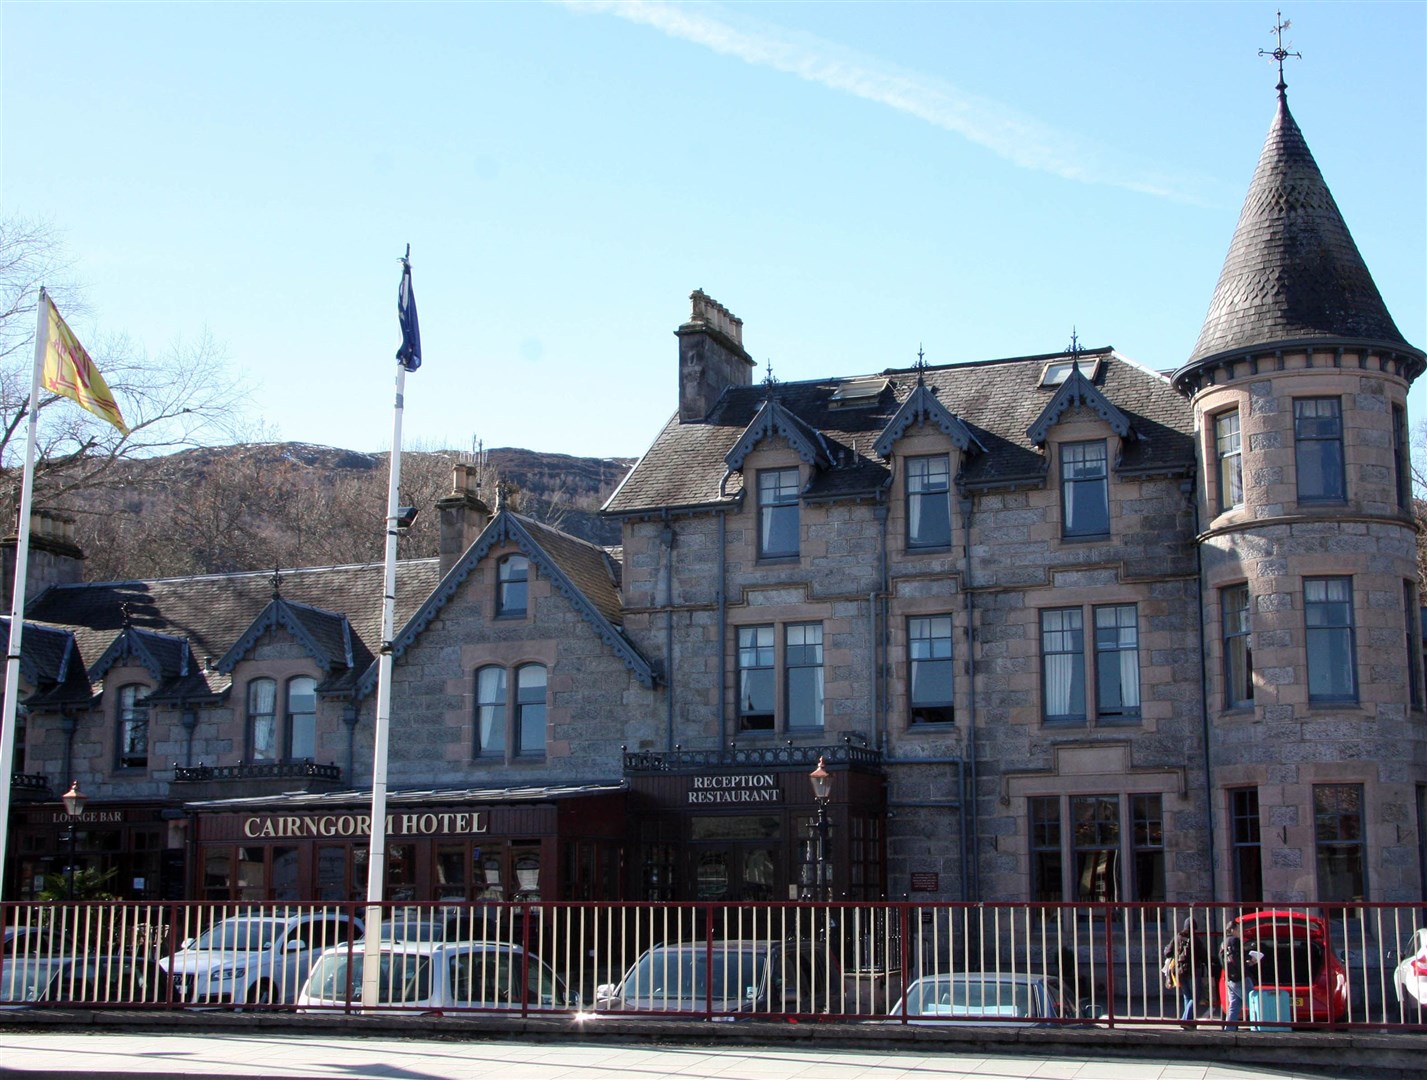 Cairngorm Hotel: has been strictly following government social distancing regulations and will now deep clean